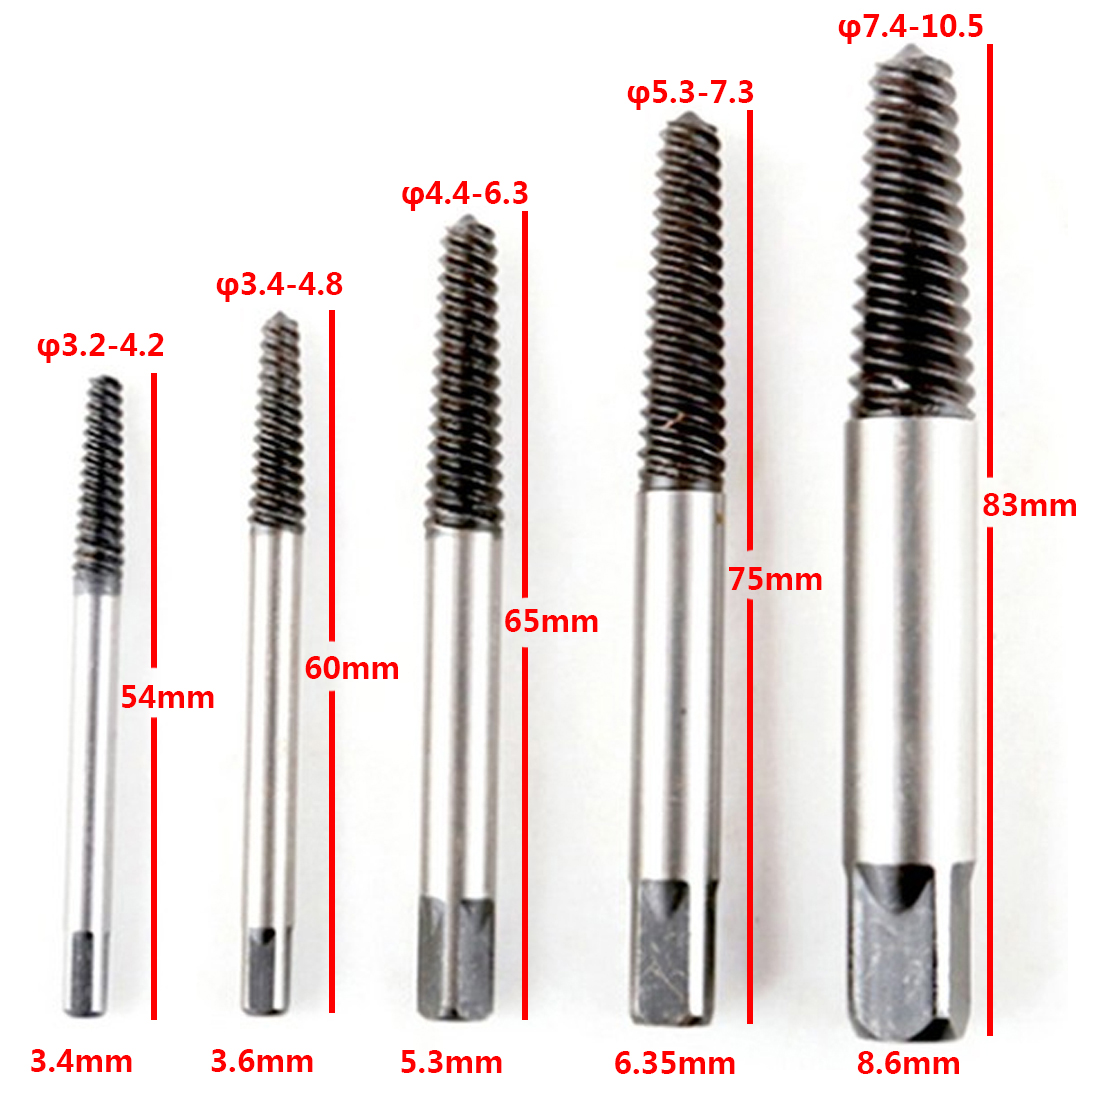 Drill Bit 5pcs/6pcs Screw Extractor Broken Bolt Remover Drill Guide Bits Set Drill Bits Easy Out Remover With Case